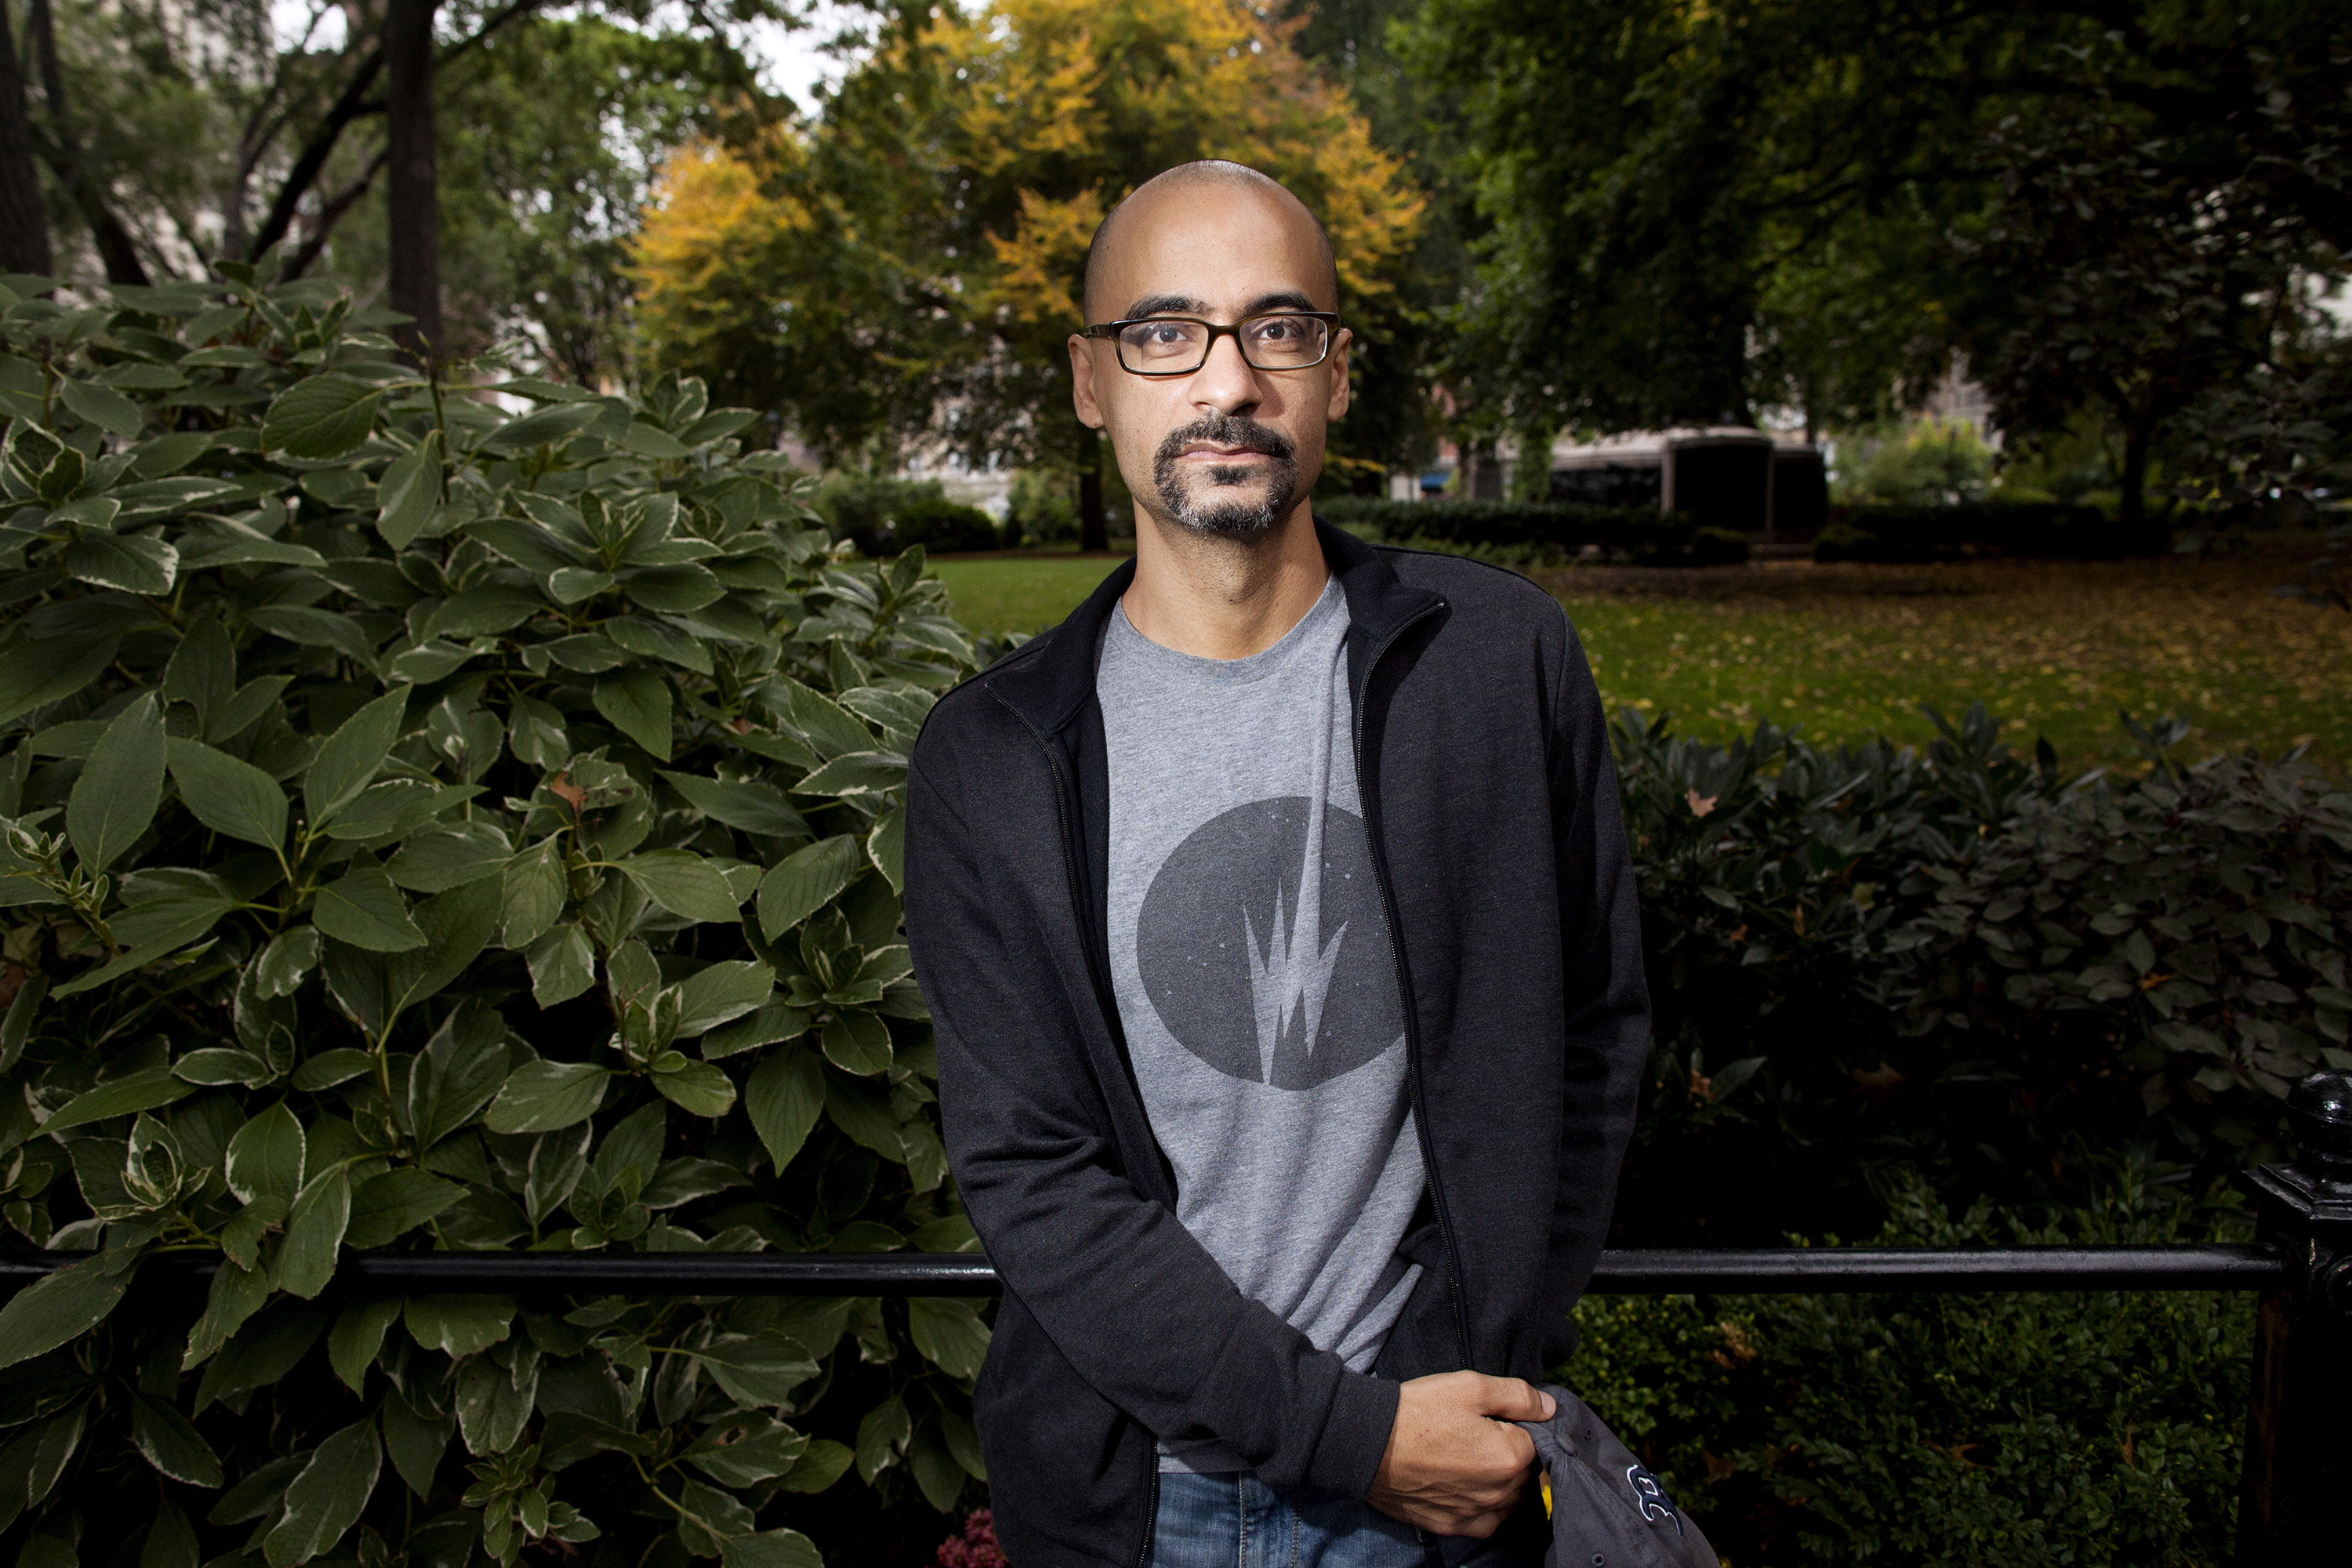 Author Junot Diaz poses in Union Square in New York, N.Y. on Oct. 7, 2013. (Chicago Tribune—TNS via Getty Images)